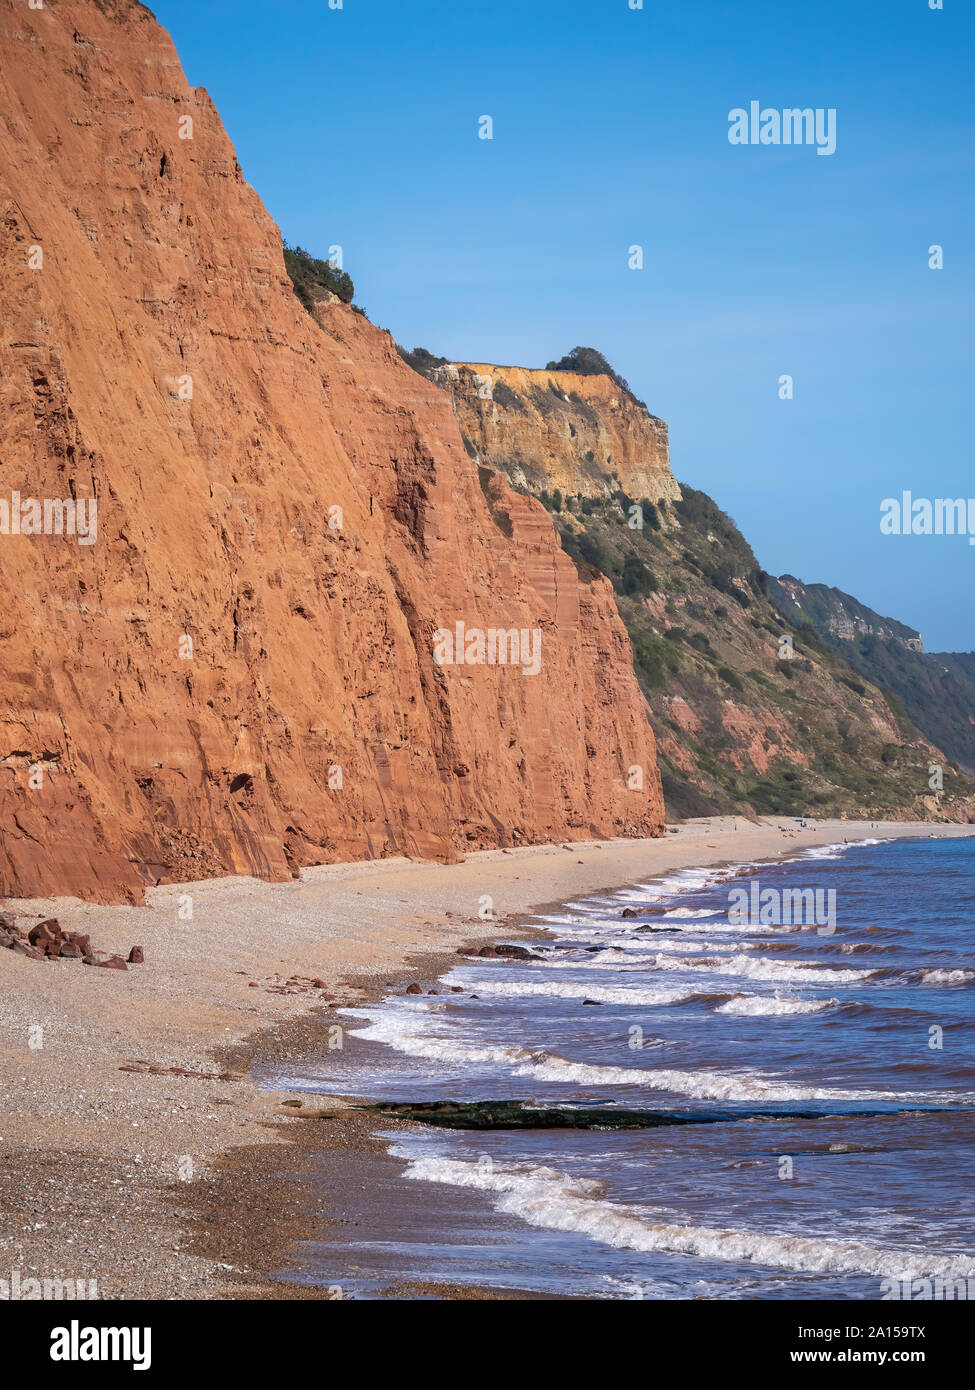 The famous Jurassic Coast red cliffs at Sidmouth, Devon, England. Looking East from Sidmouth Beach to Salcombe Hill Cliff. Vertical shot. Stock Photo